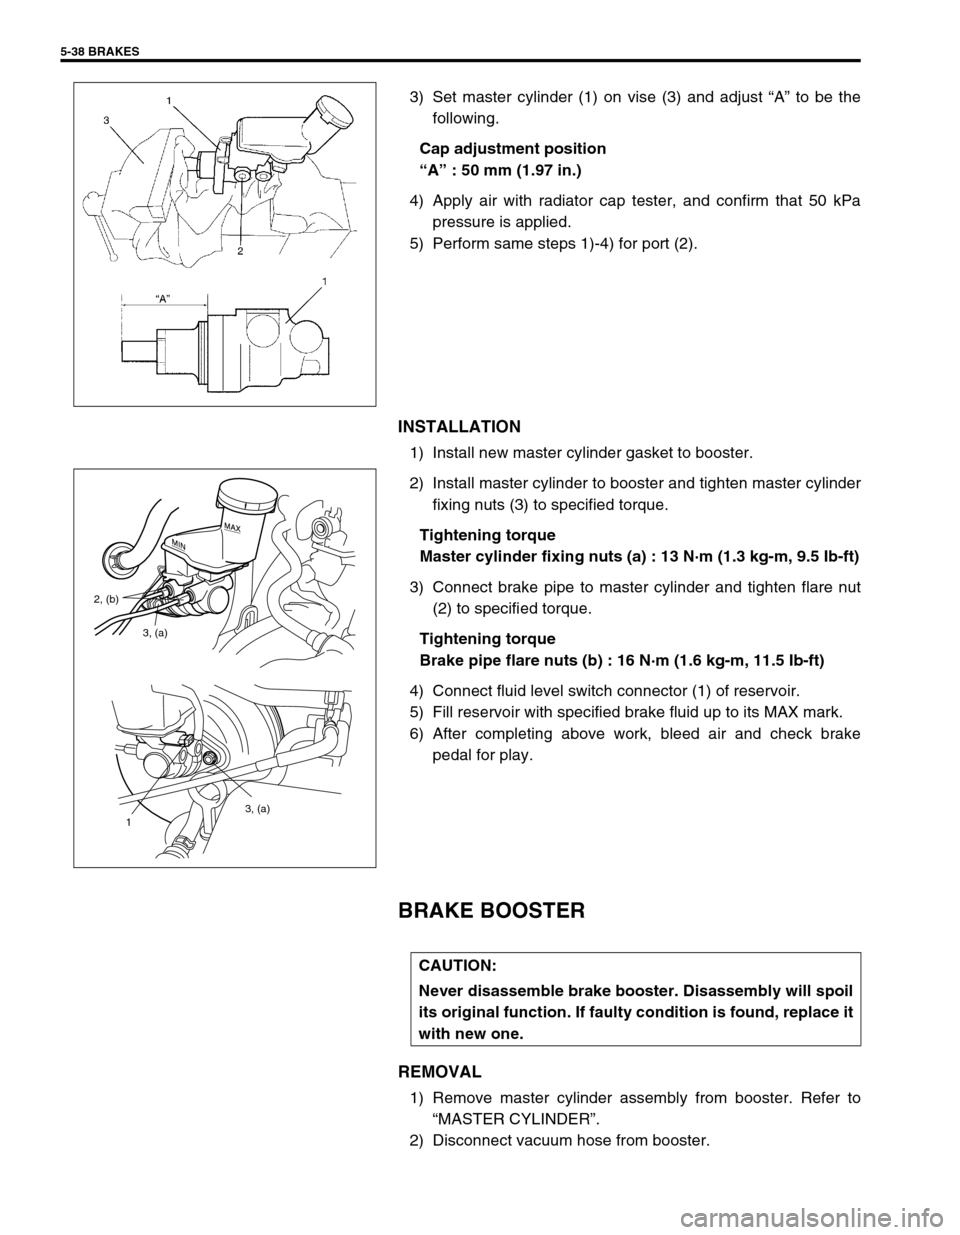 SUZUKI SWIFT 2000 1.G RG413 Service Workshop Manual 5-38 BRAKES
3) Set master cylinder (1) on vise (3) and adjust “A” to be the
following.
Cap adjustment position
“A” : 50 mm (1.97 in.)
4) Apply air with radiator cap tester, and confirm that 50